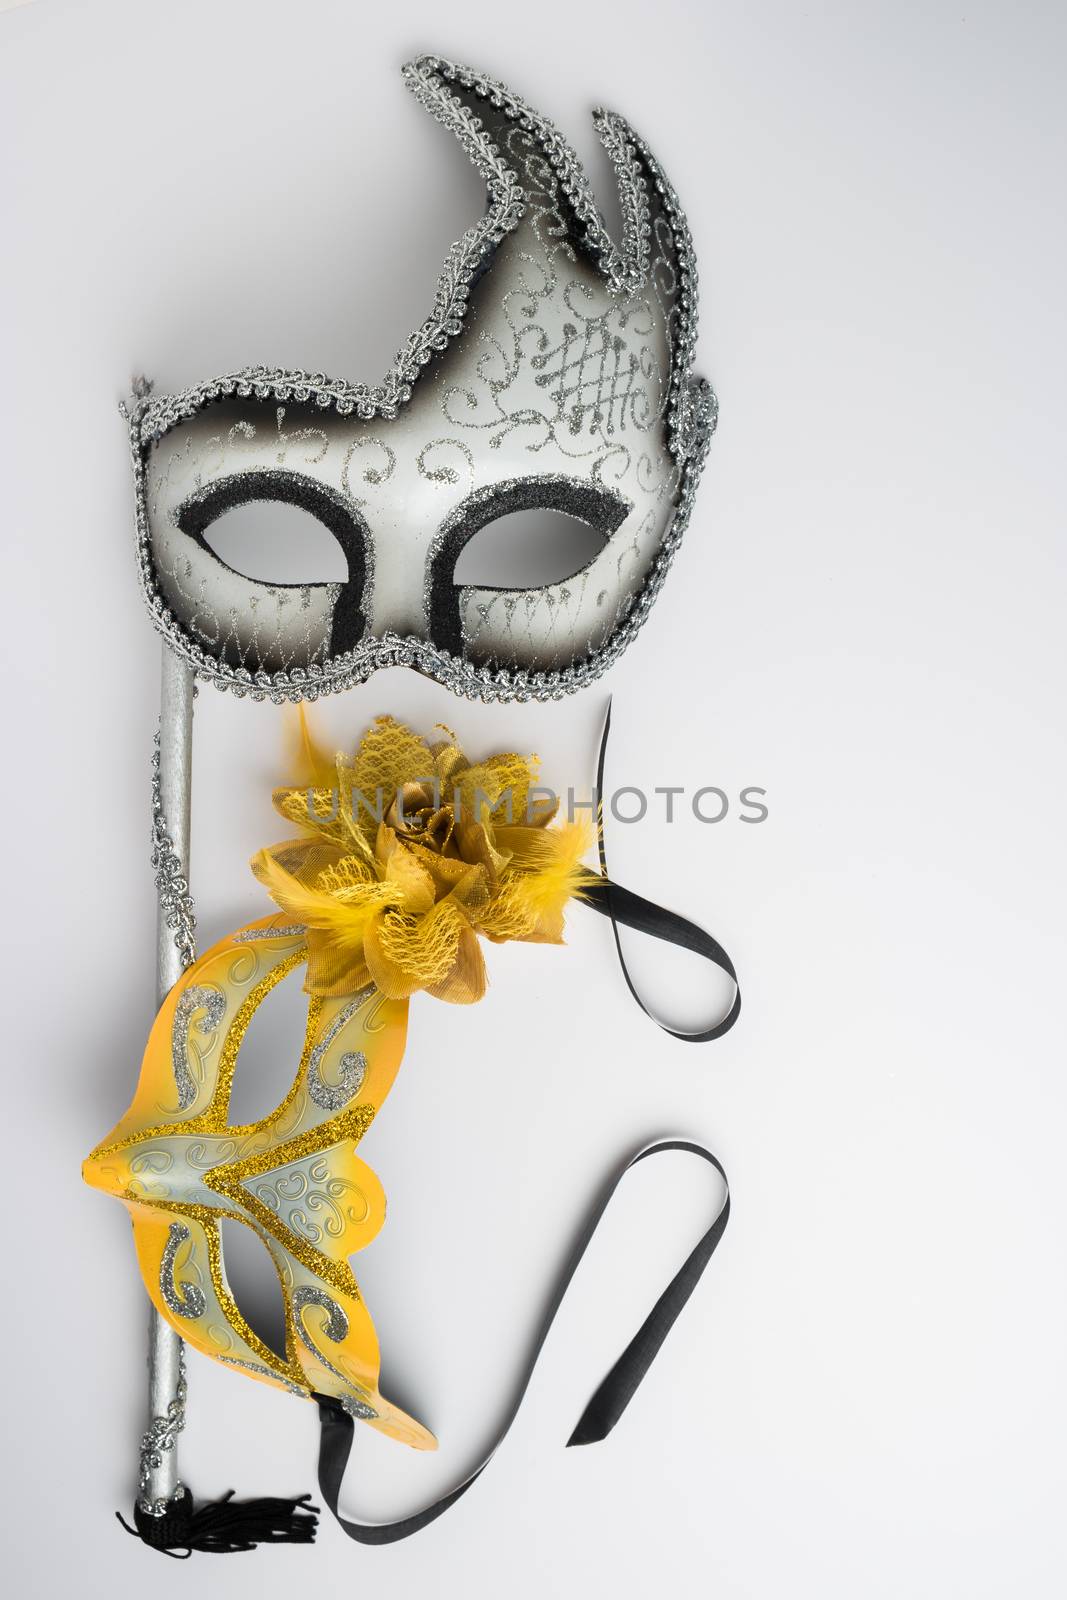 Colorful carnival masks by AnaMarques